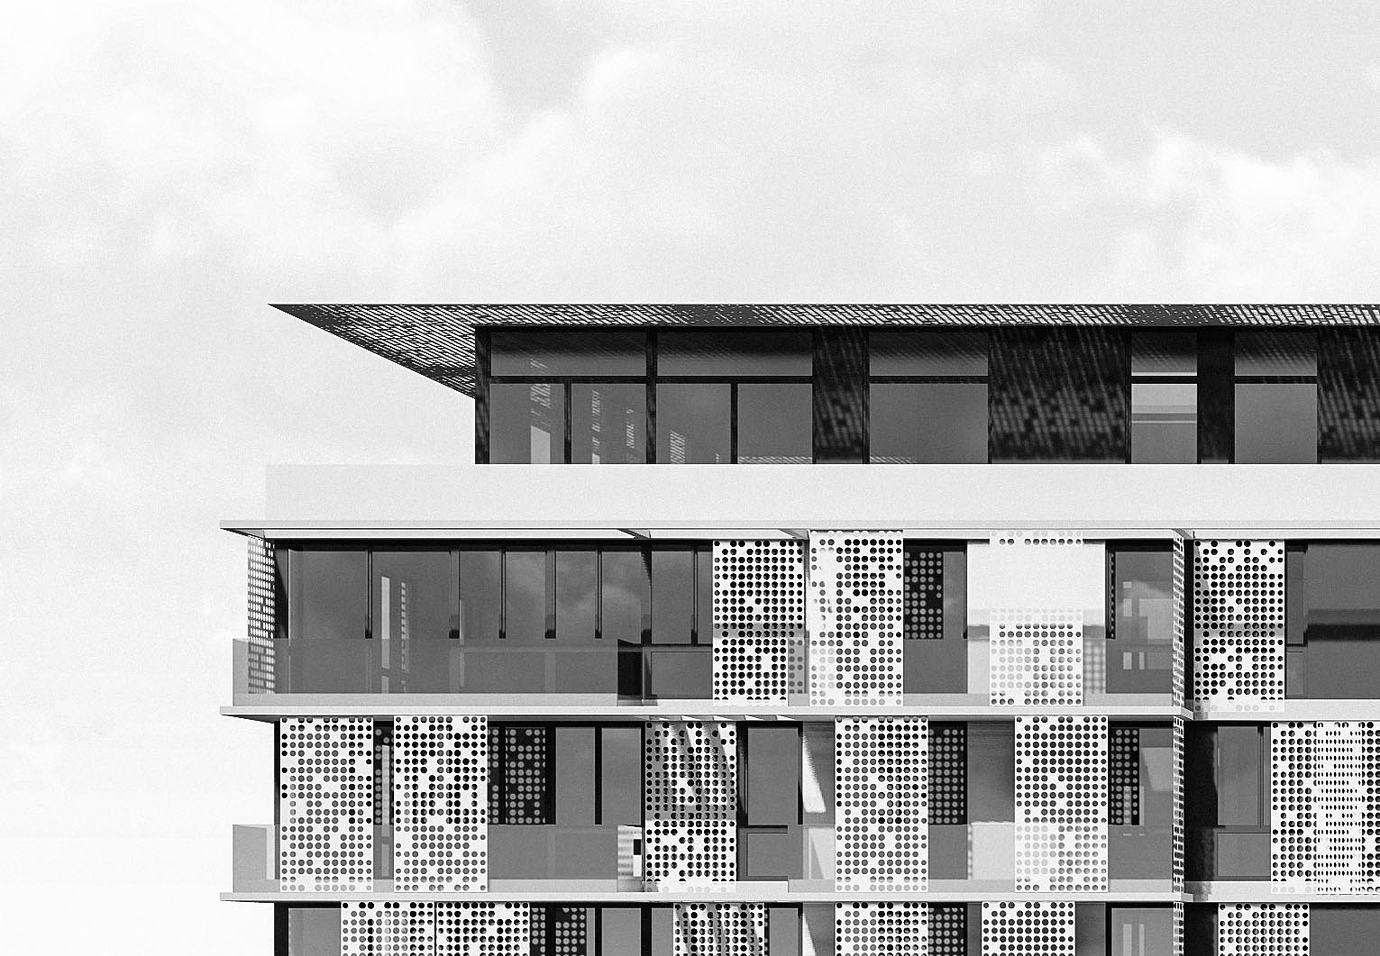 Modeling perforated metal facades in SketchUp - Process - Talk at Ronen